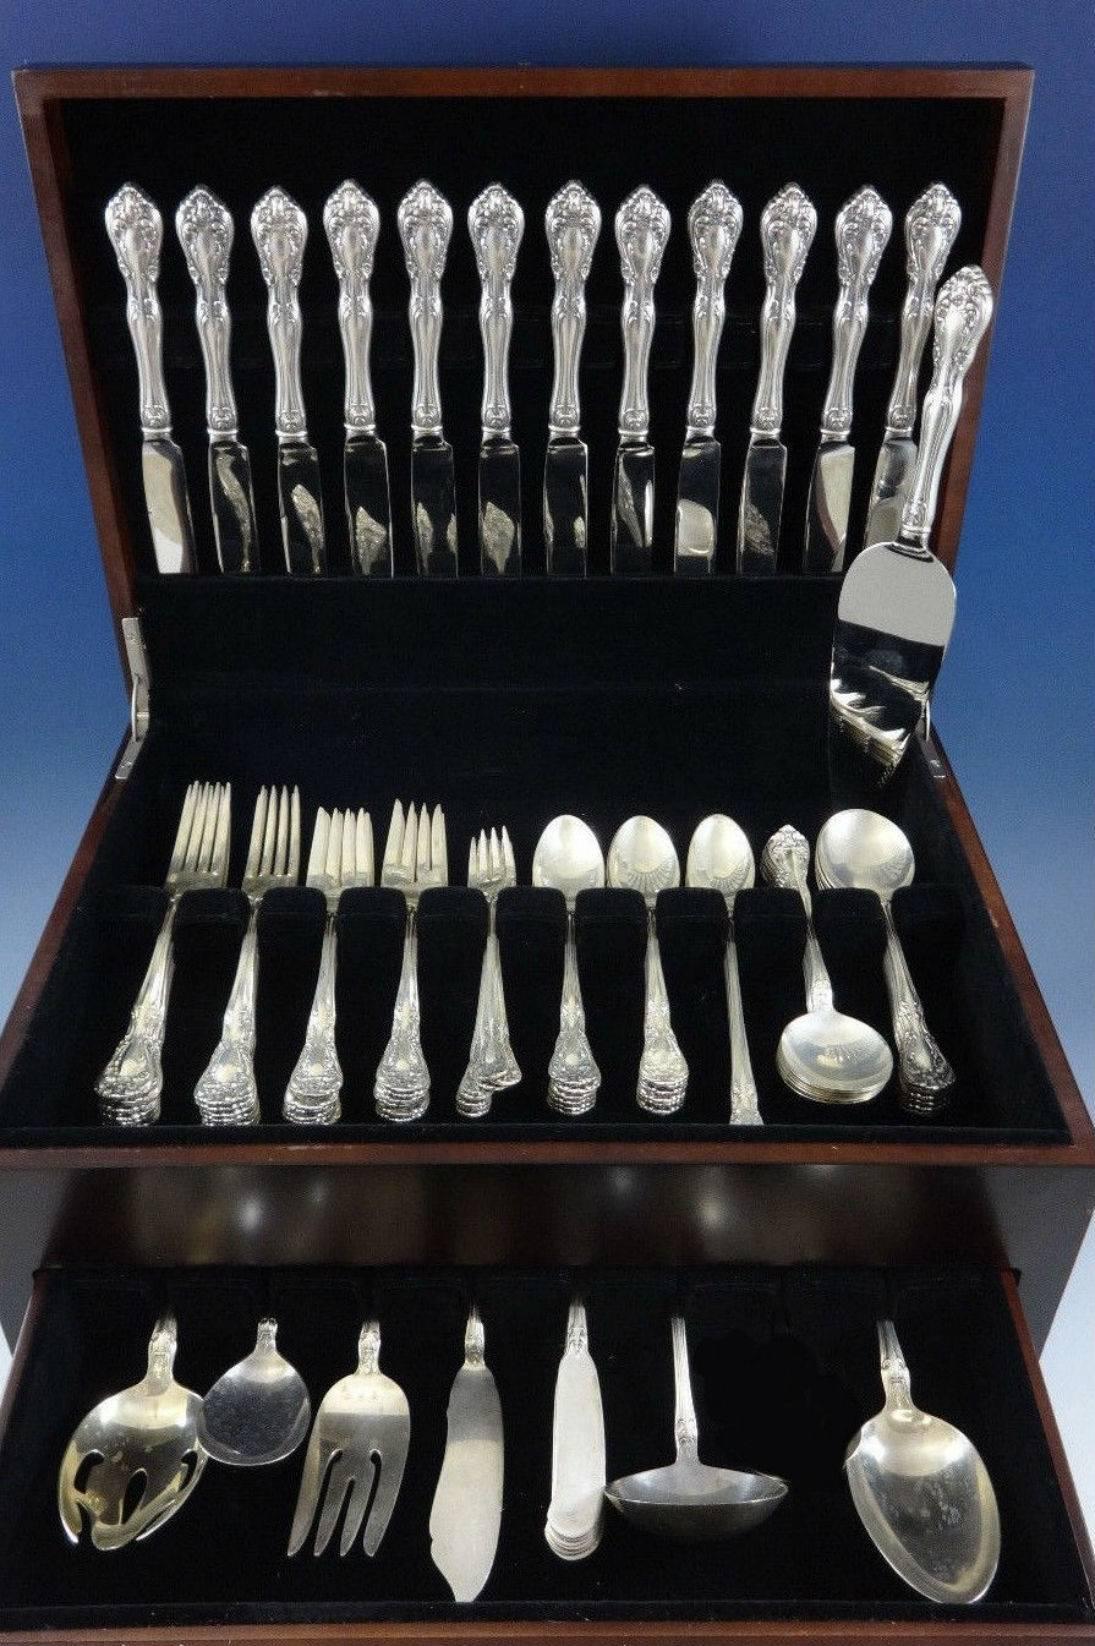 Chateau Rose by Alvin sterling silver flatware set - 104 pieces. This set includes: 

12 knives, 8 7/8